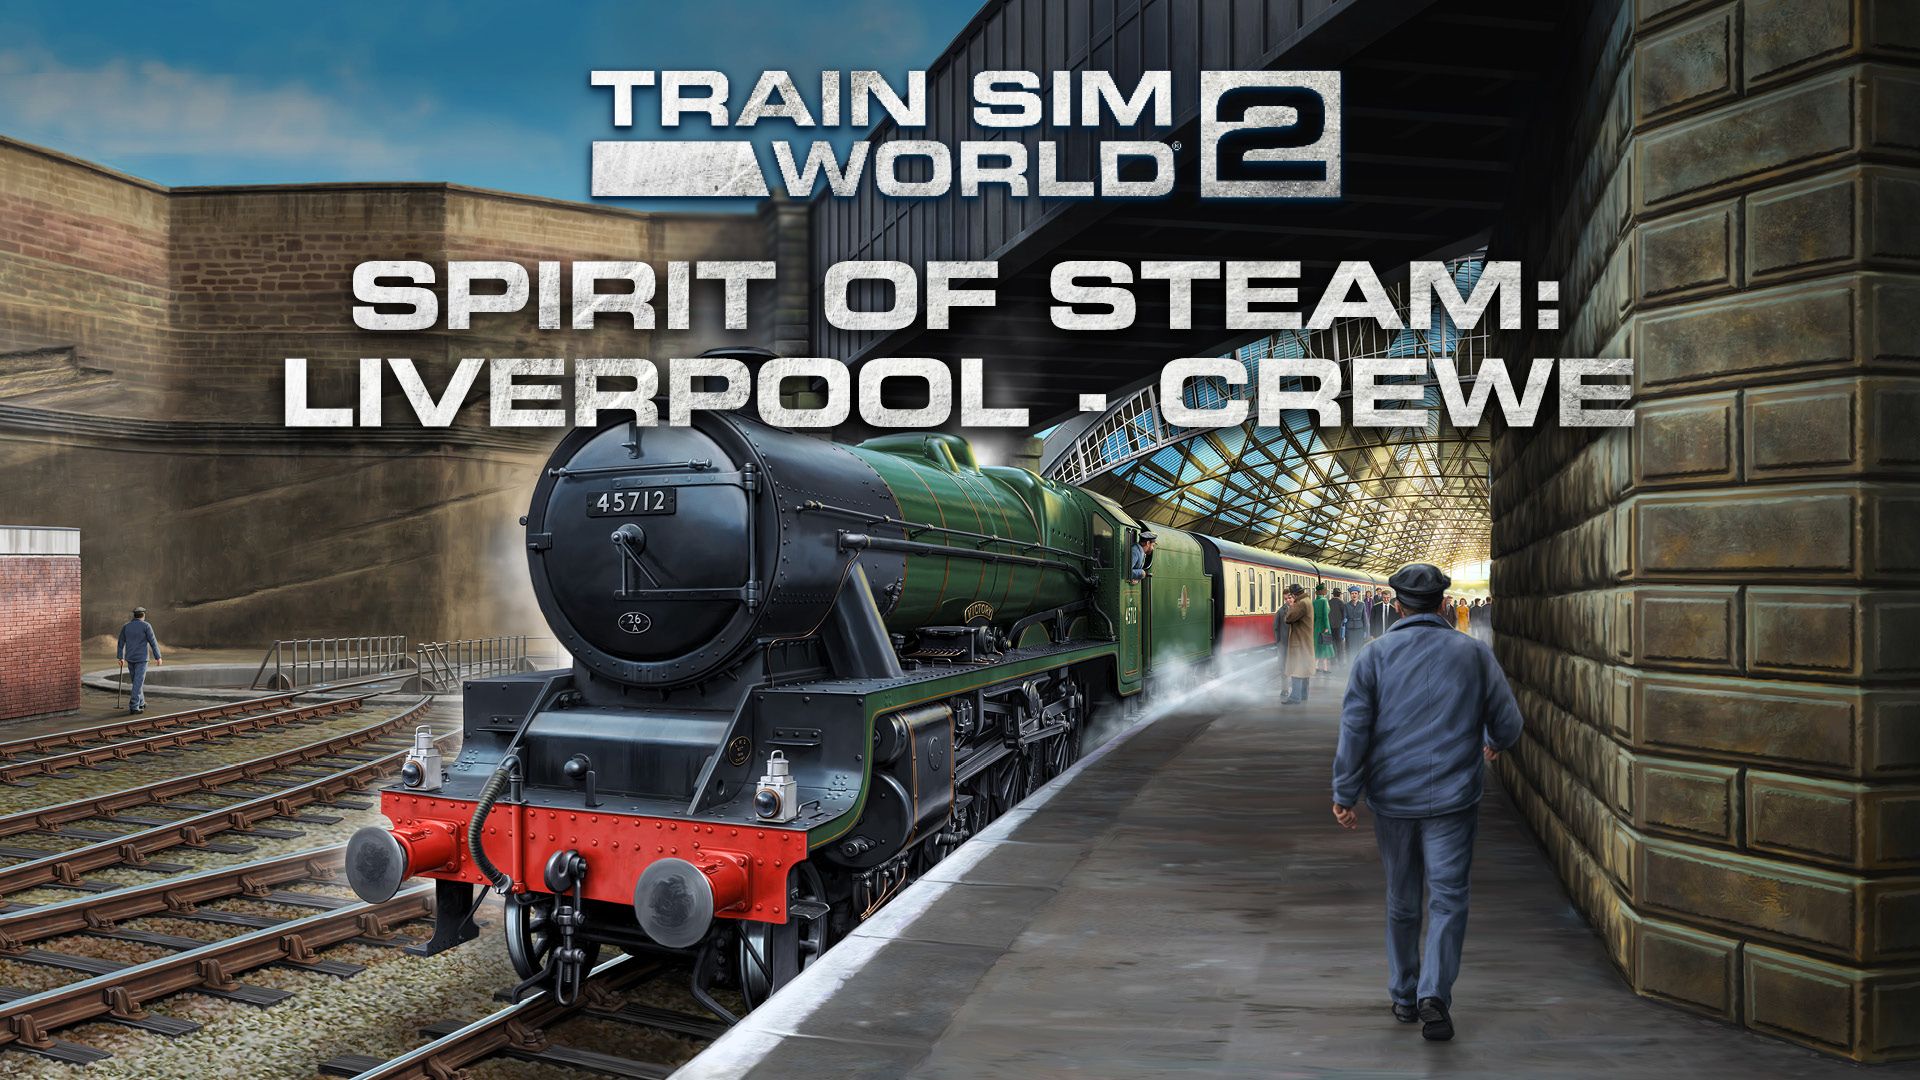 Video For Experience Life on the Footplate with Spirit of Steam for Train Sim World 2